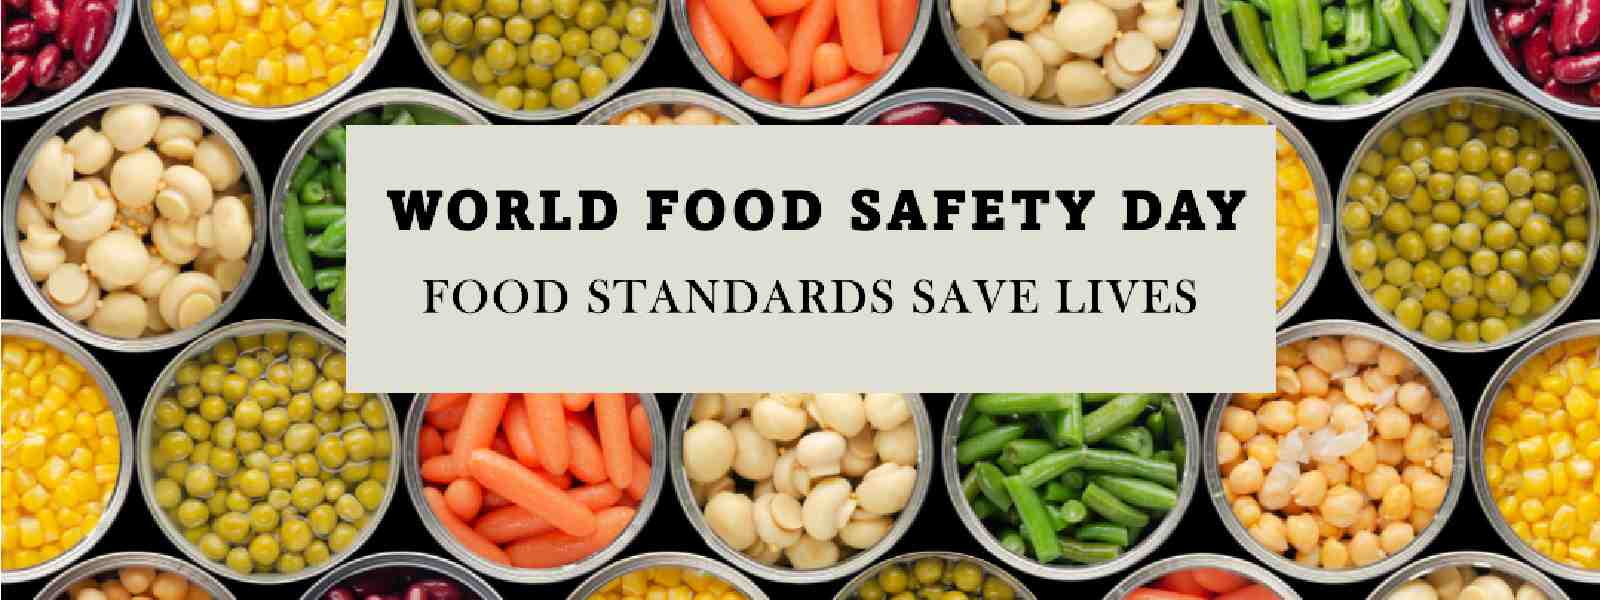 FAO & BESPA-FOOD to bring new food safety system